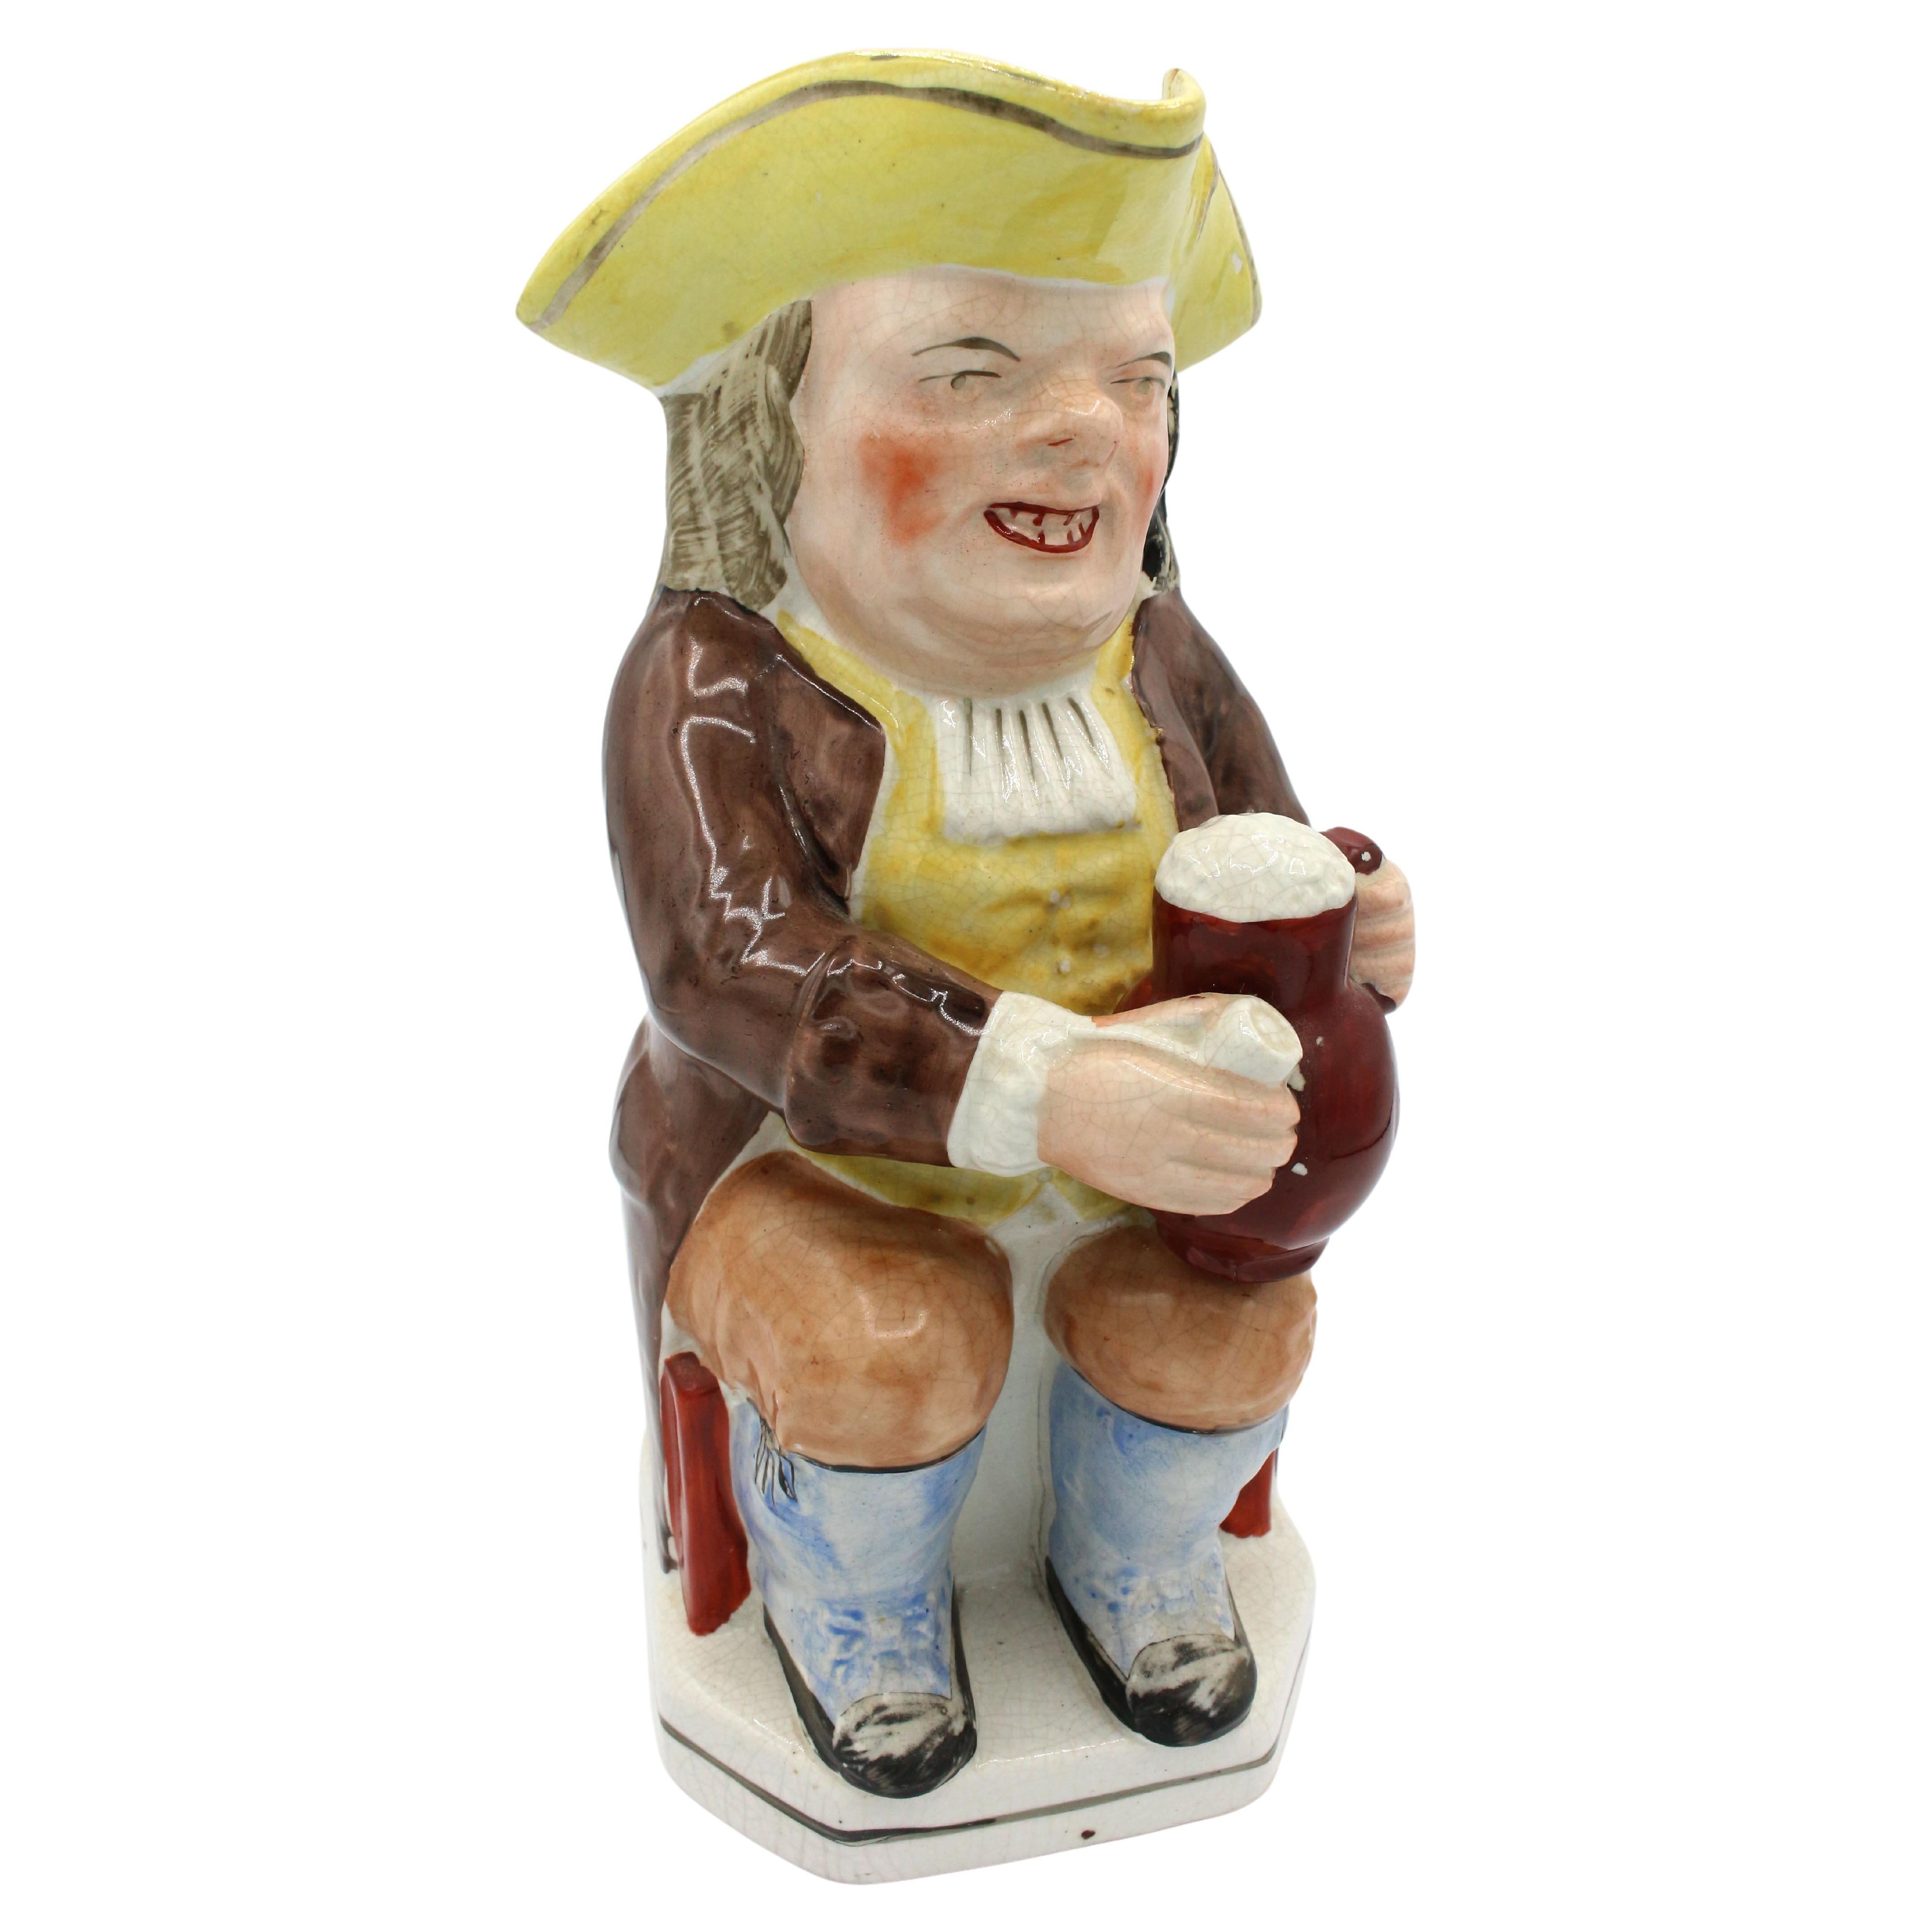 The Drunken Parson with White Clerical Collar Toby Jug, Angleterre, vers 1880 en vente